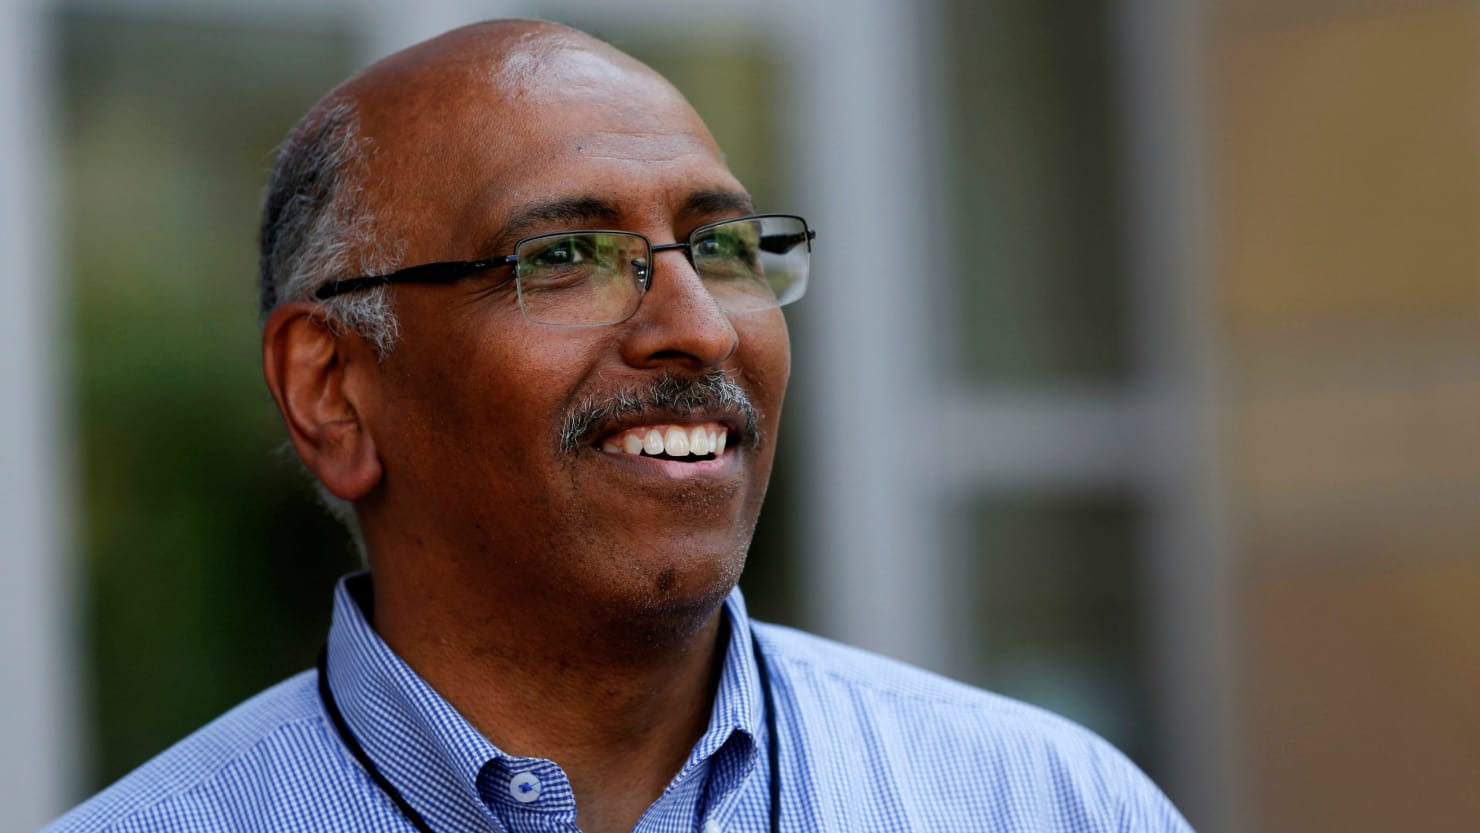 Former RNC chair Michael Steele says MTG 'will be the most